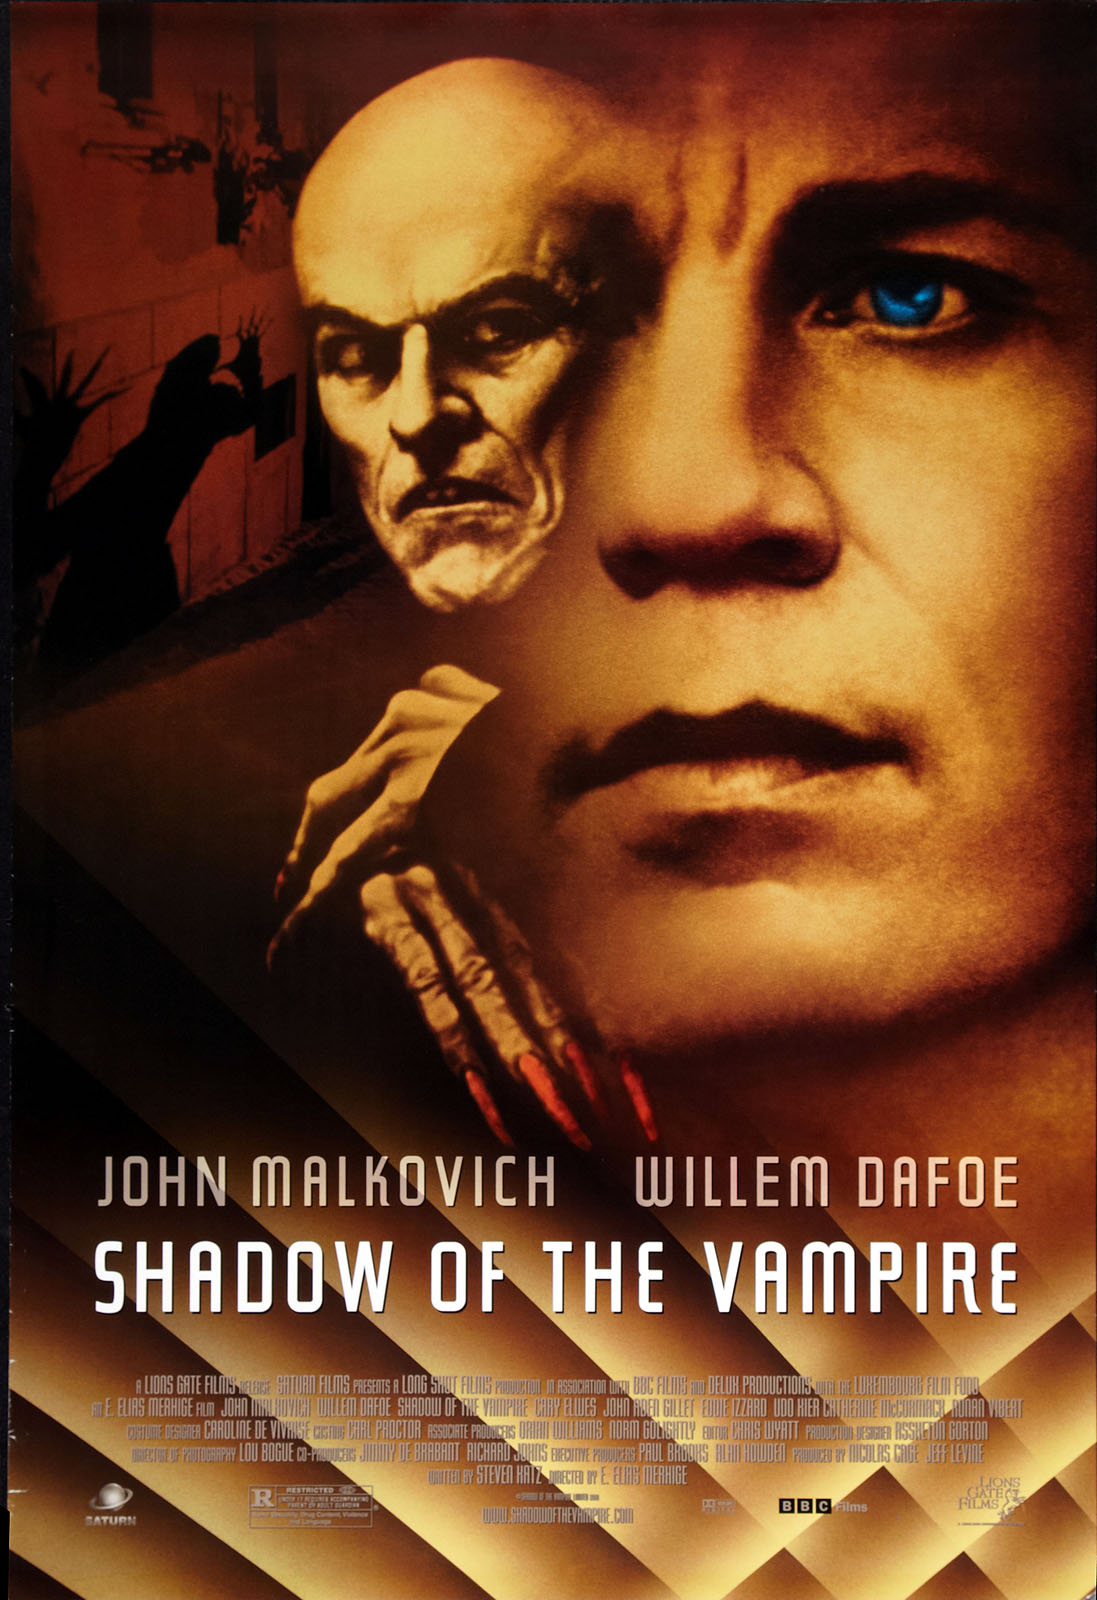 SHADOW OF THE VAMPIRE